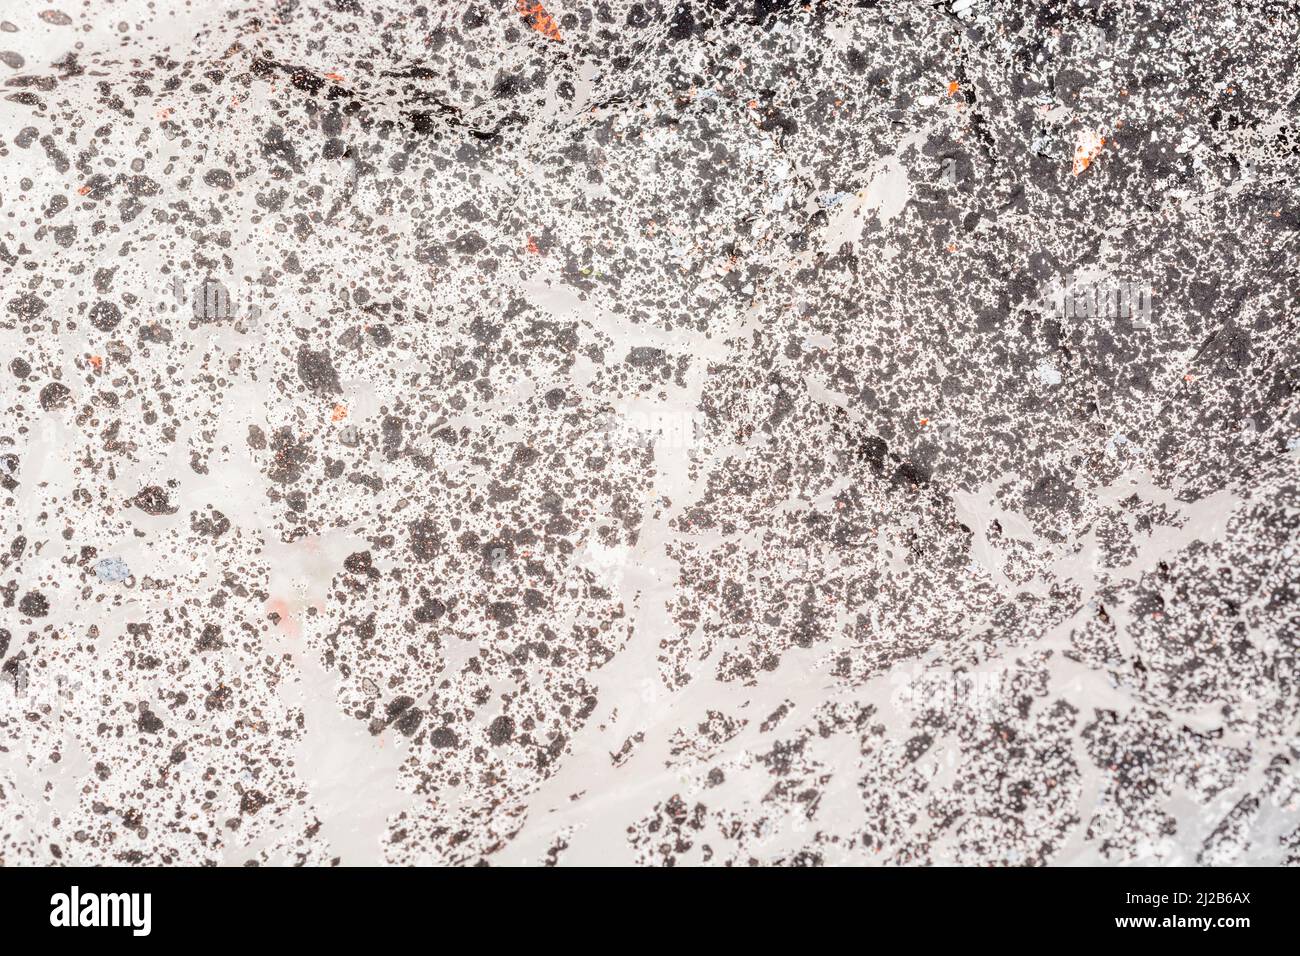 Close-up texture of paint covered plastic dust sheet covered by flaking paint spray. For peeling paint, making a mess of things. Stock Photo